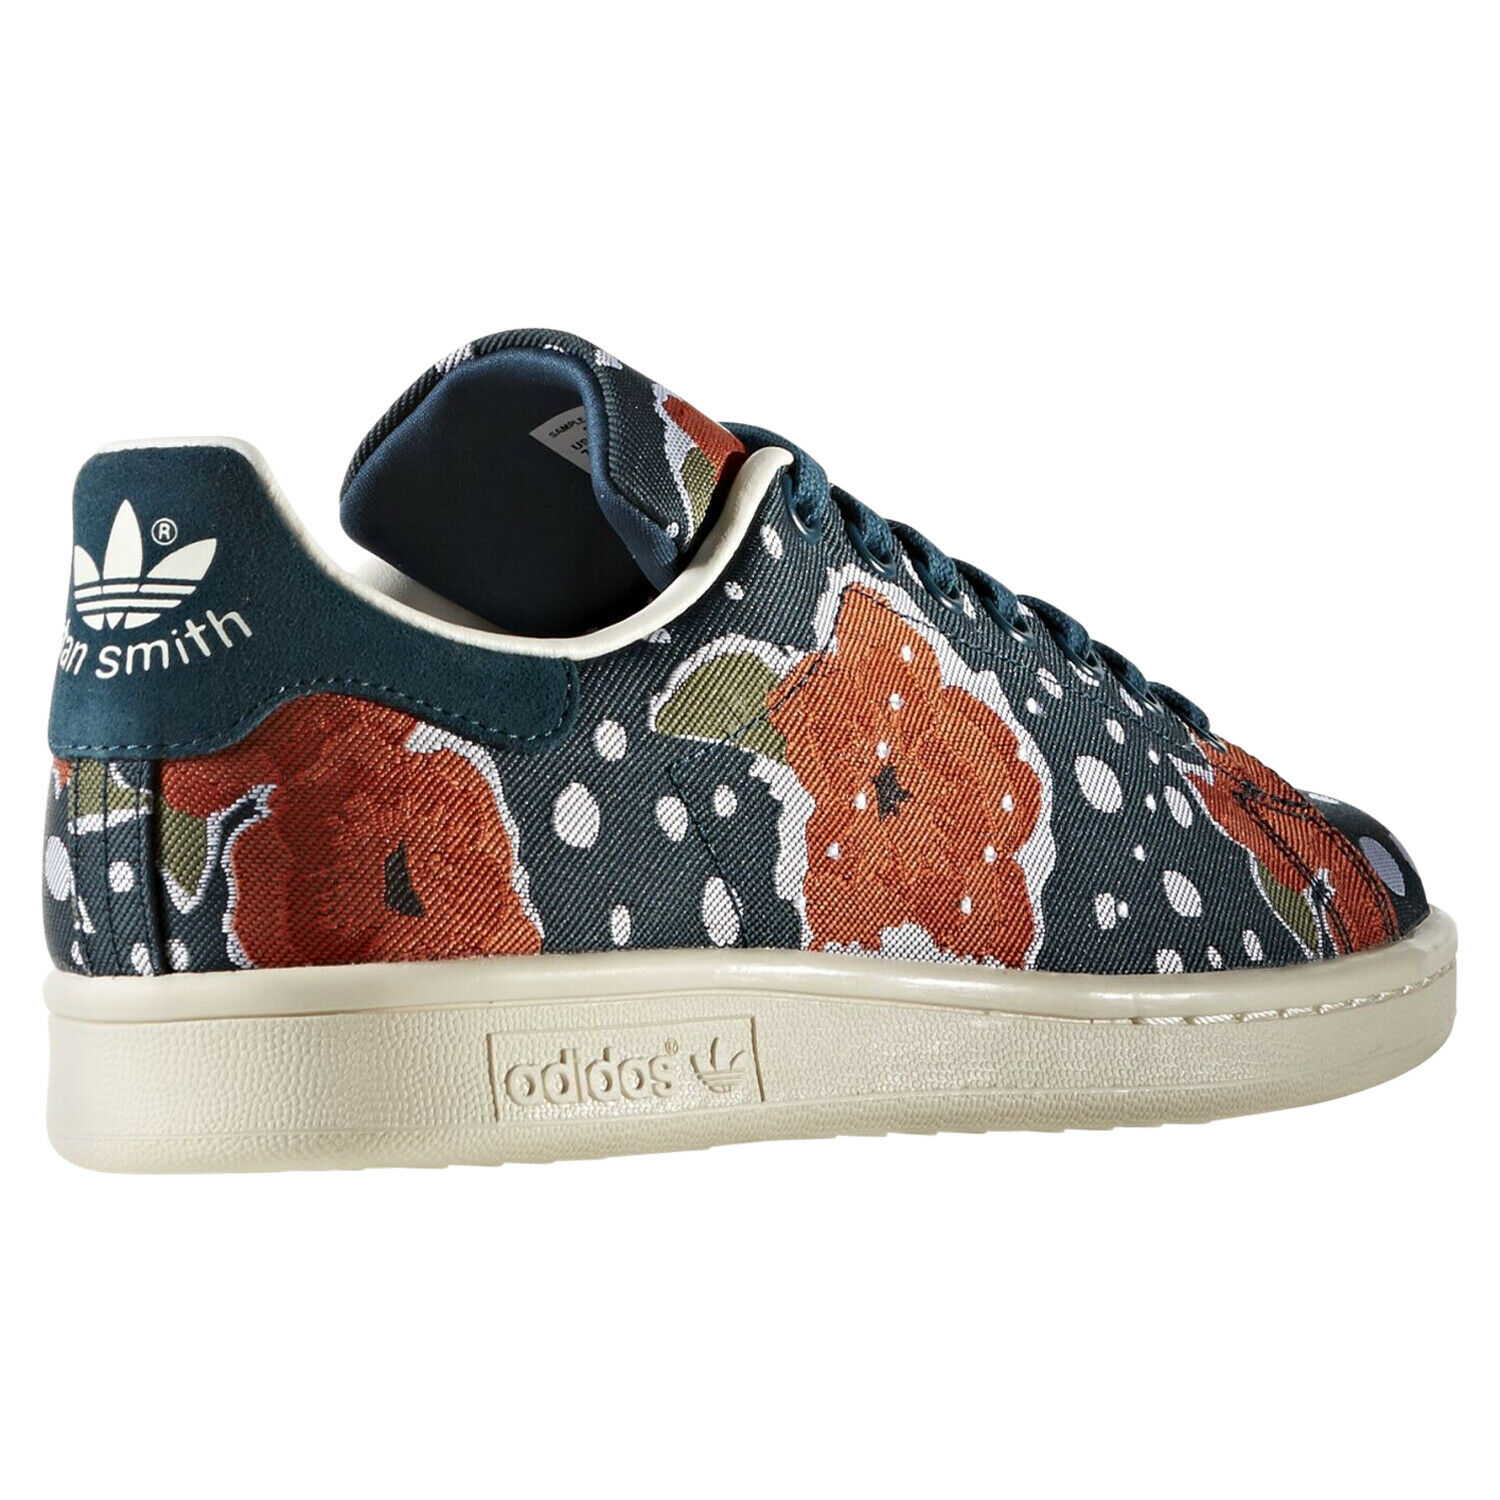 stan smith flower shoes